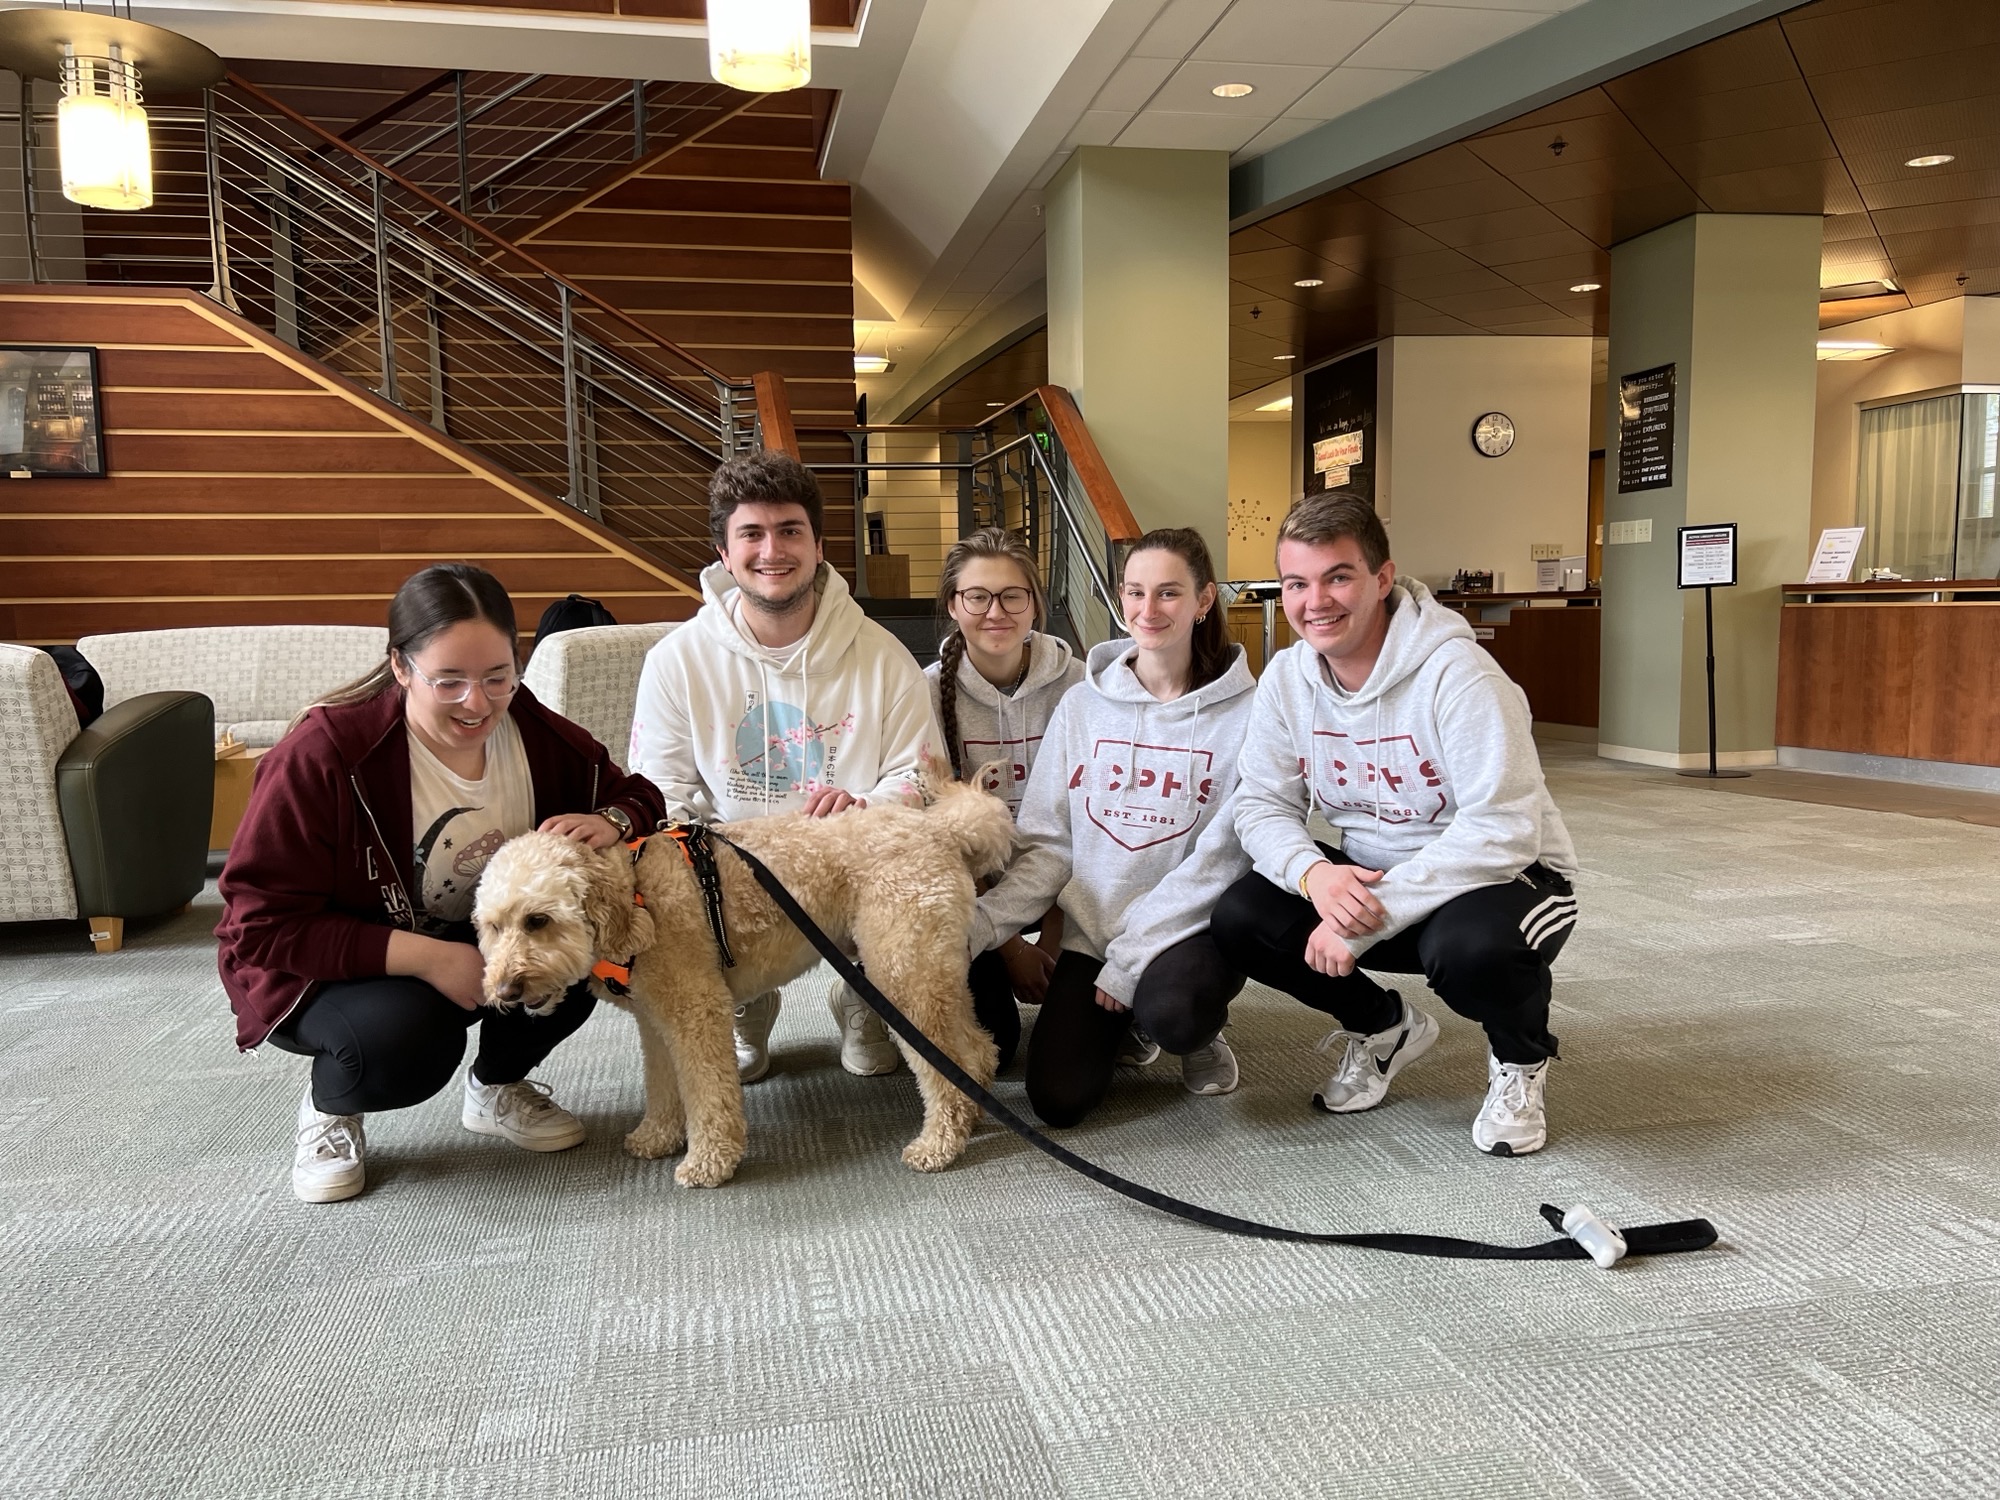 ACPHS students gather around therapy dog in library to destress during finals